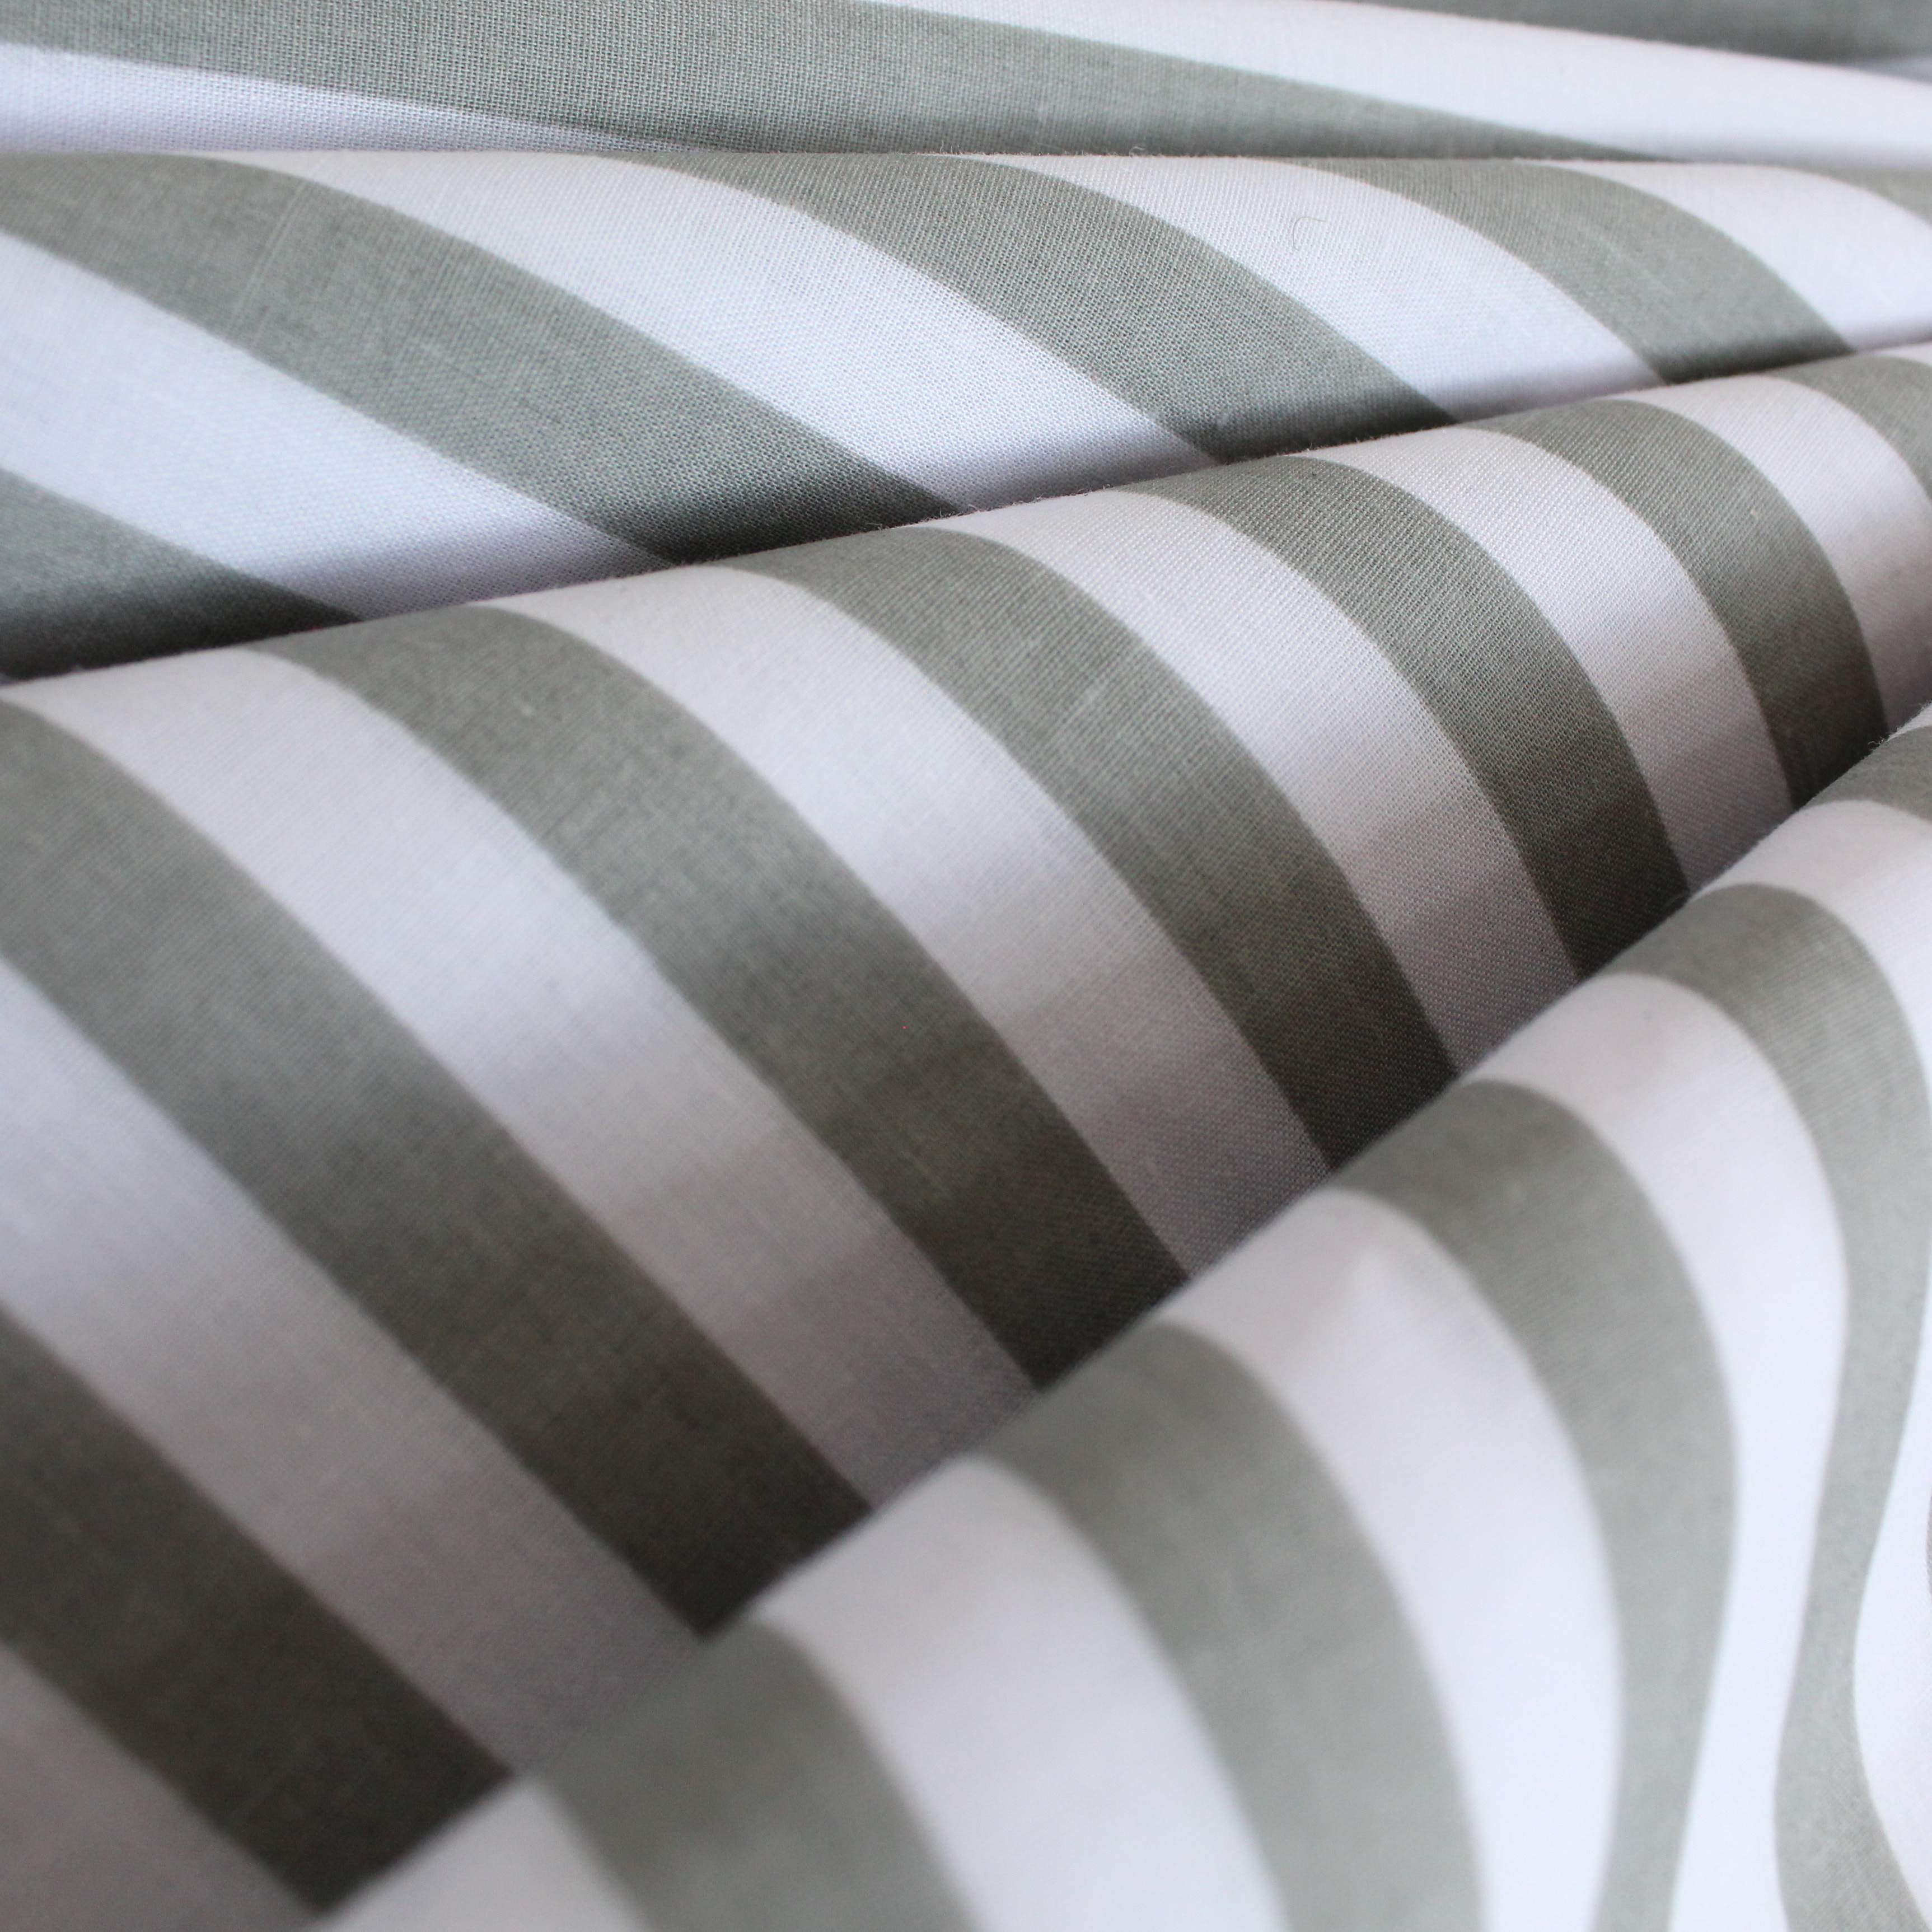 Large Stripe Polycotton Fabric, 44" Wide, Variations Available